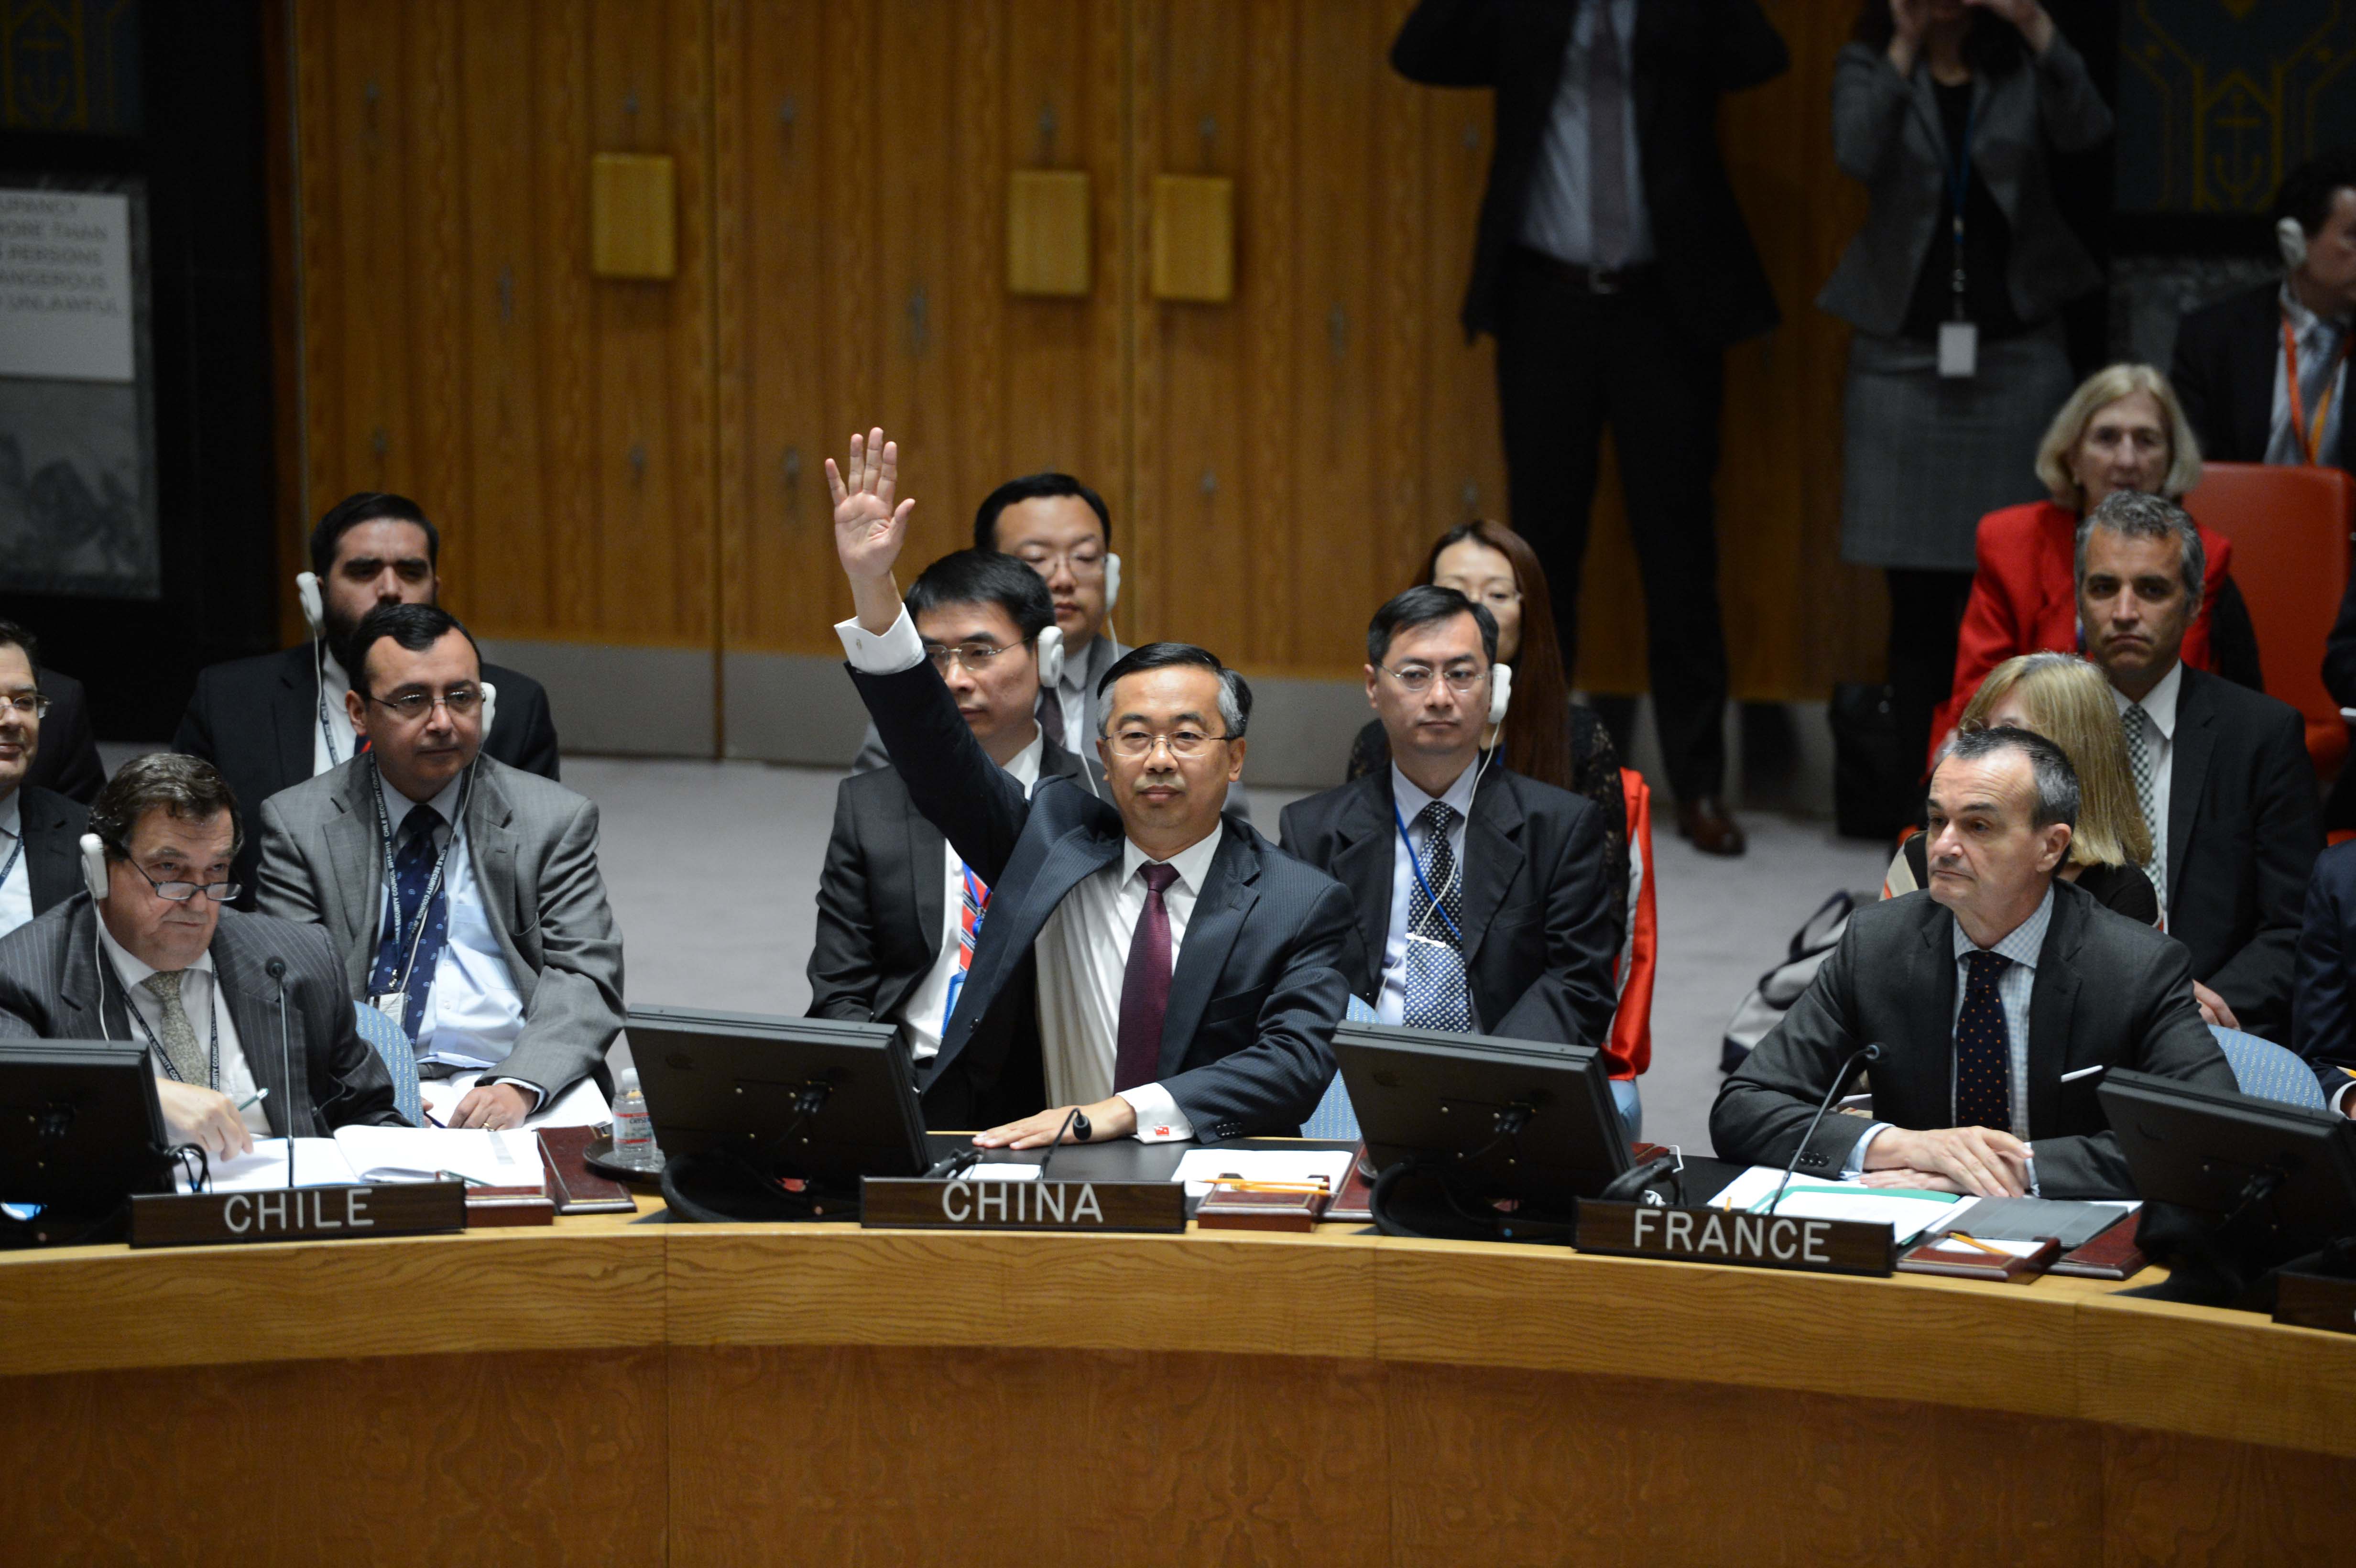 Wang Min (centre), China's deputy permanent representative to the United Nations, votes against a Security Council draft resolution on Syria, at the UN headquarters in New York. Photo: Xinhua